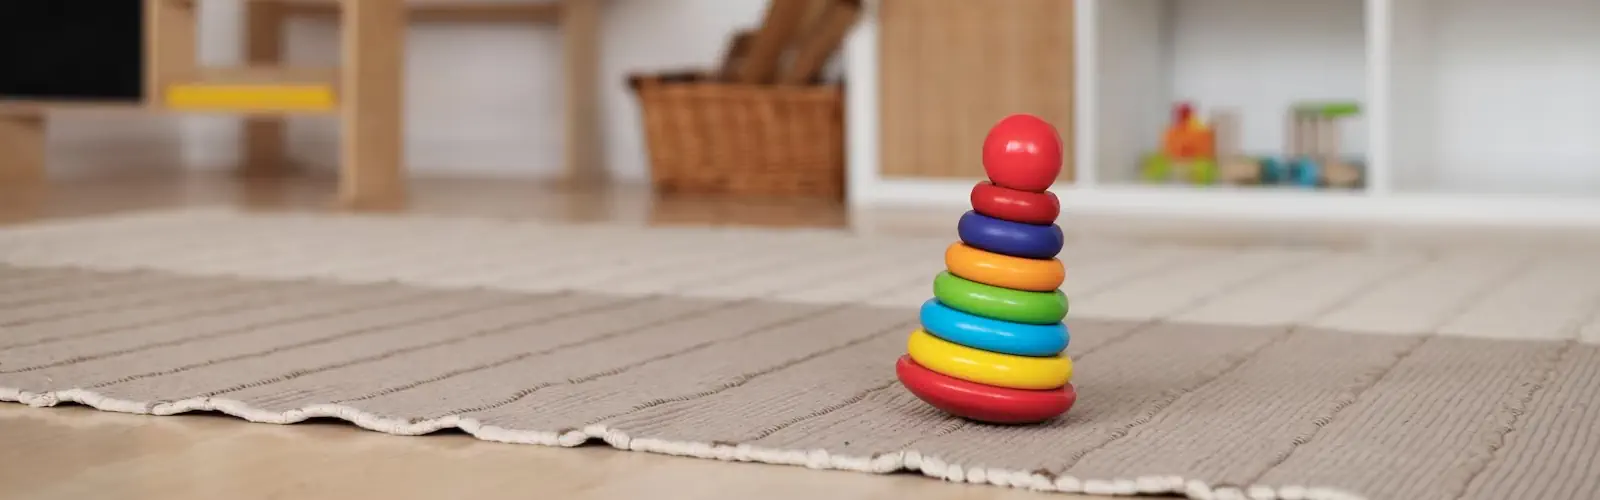 cheap classic wooden toys for baby & educational toys